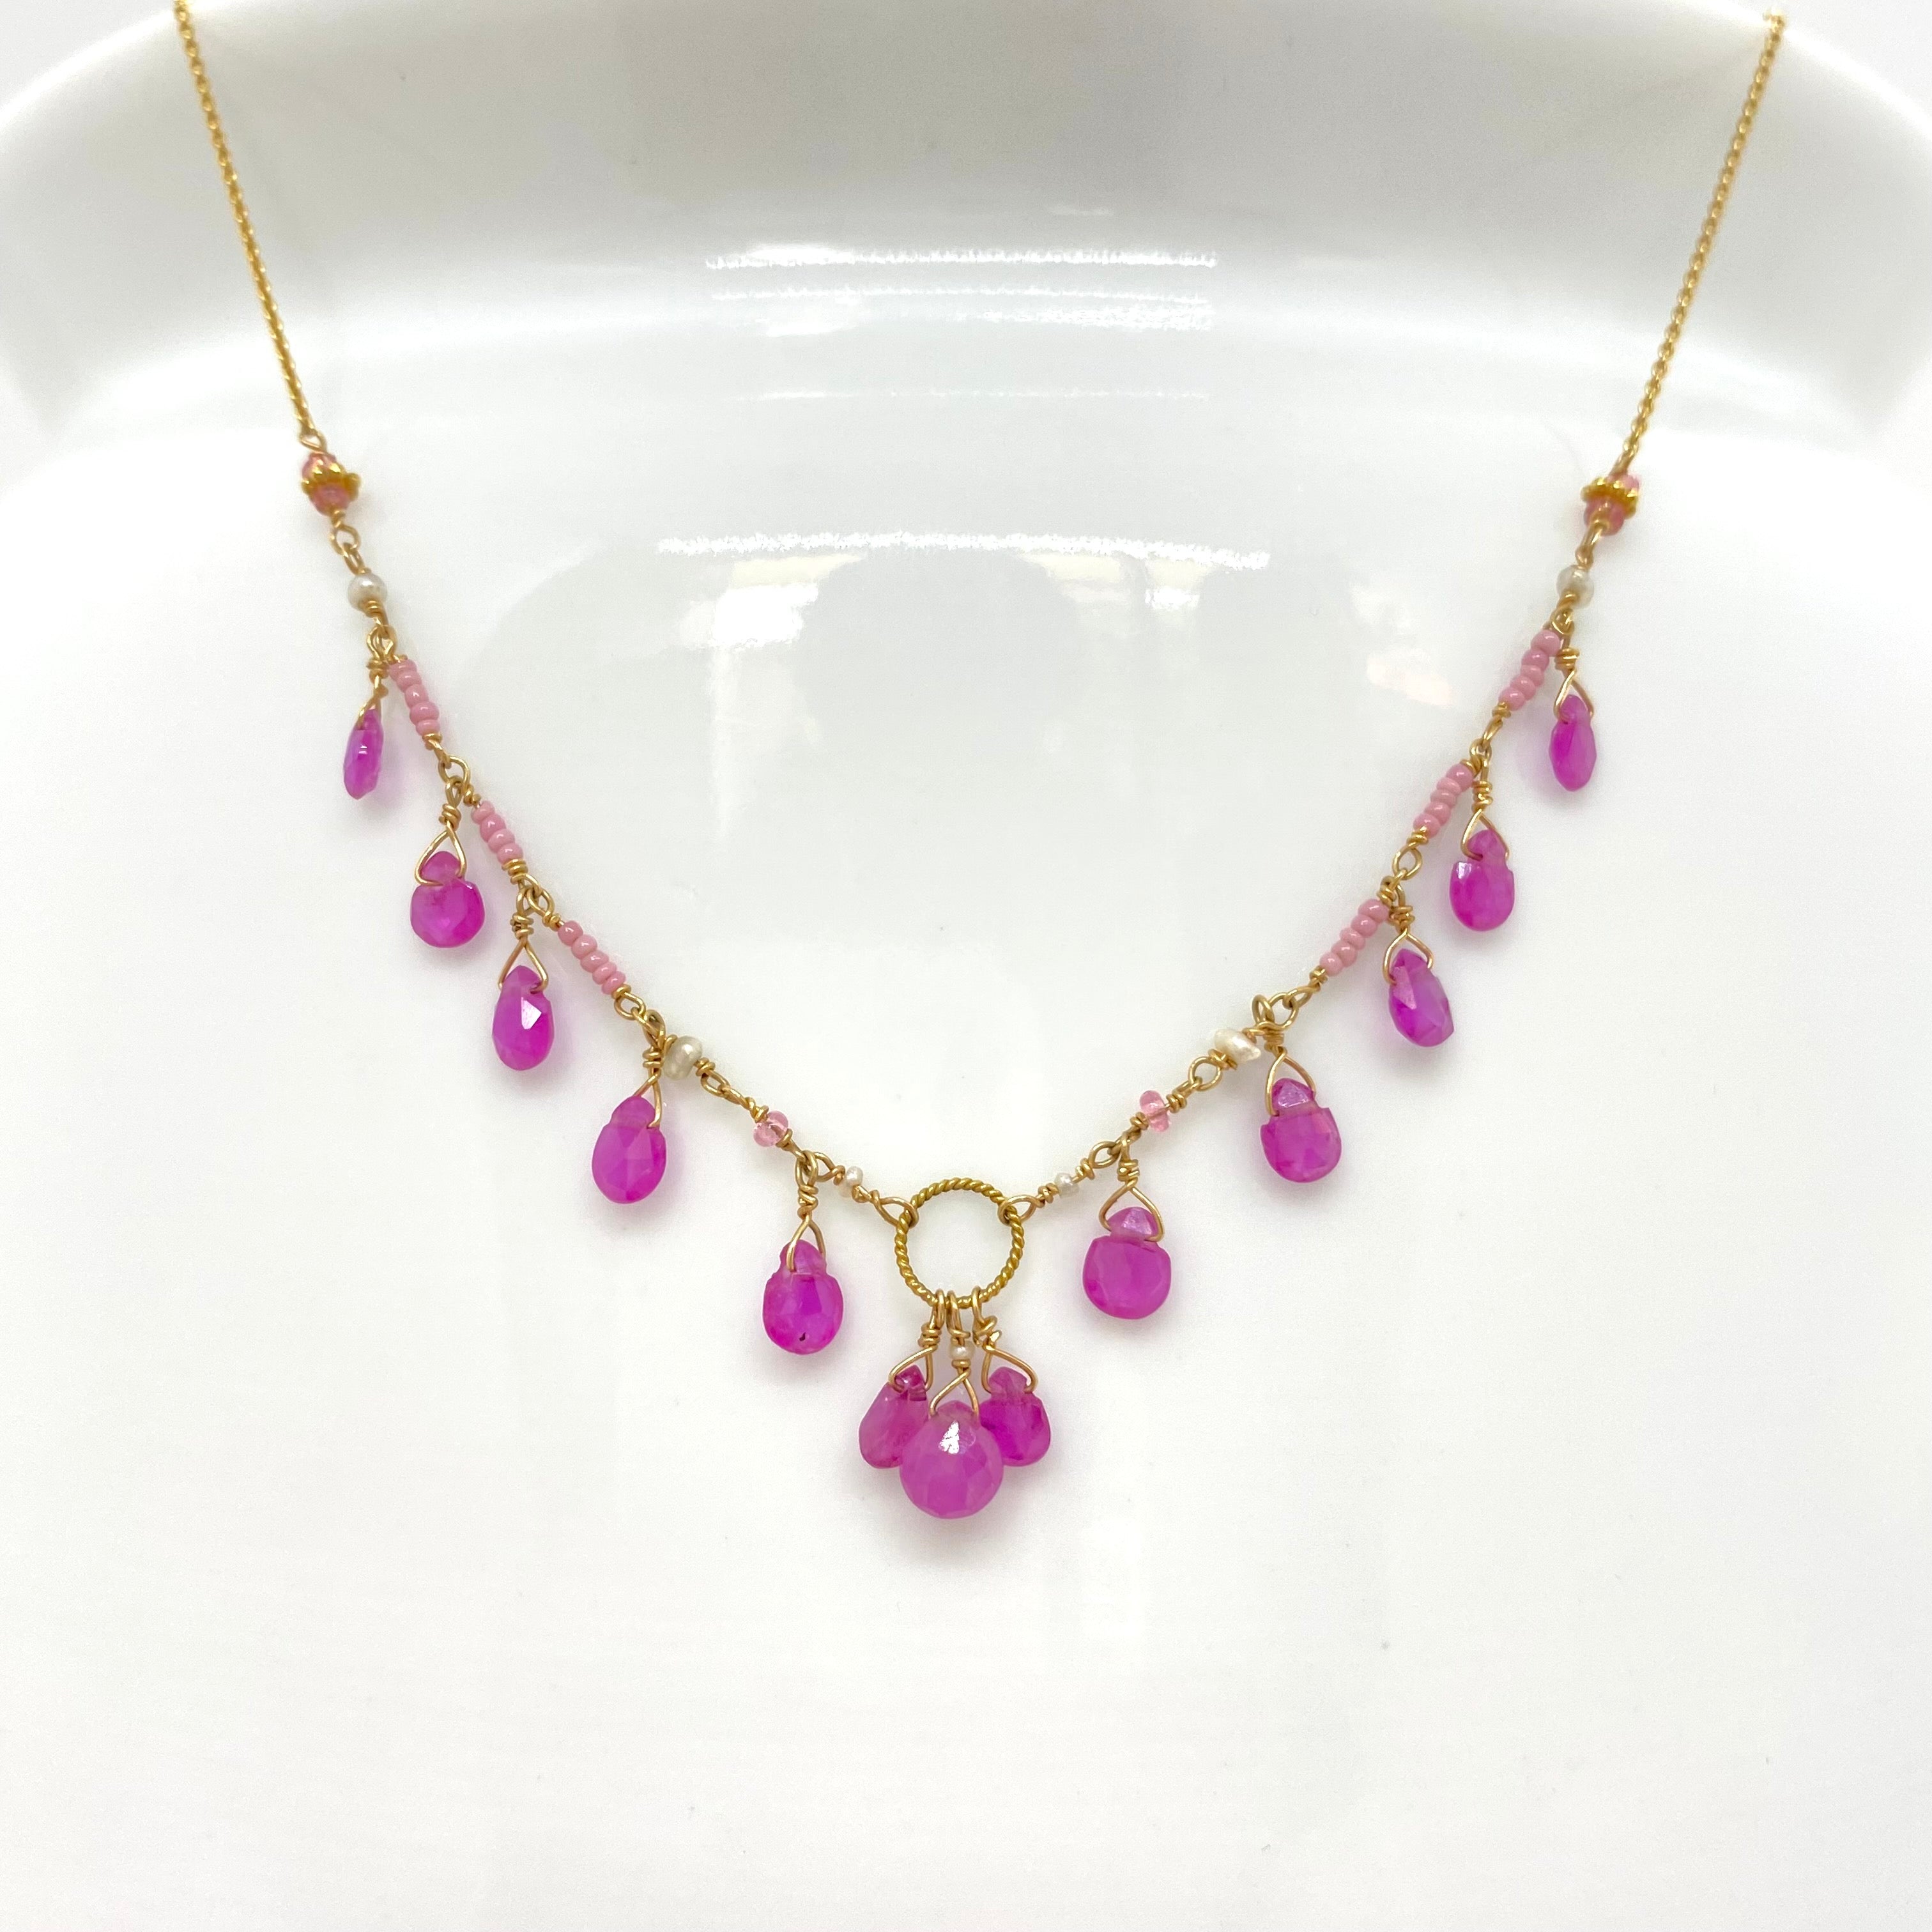 14k Gold Chain Necklace w/ Pink Sapphires, Freshwater Pearls, 18k Gold Daisy, 18k Gold Loop & Antique Italian Beads